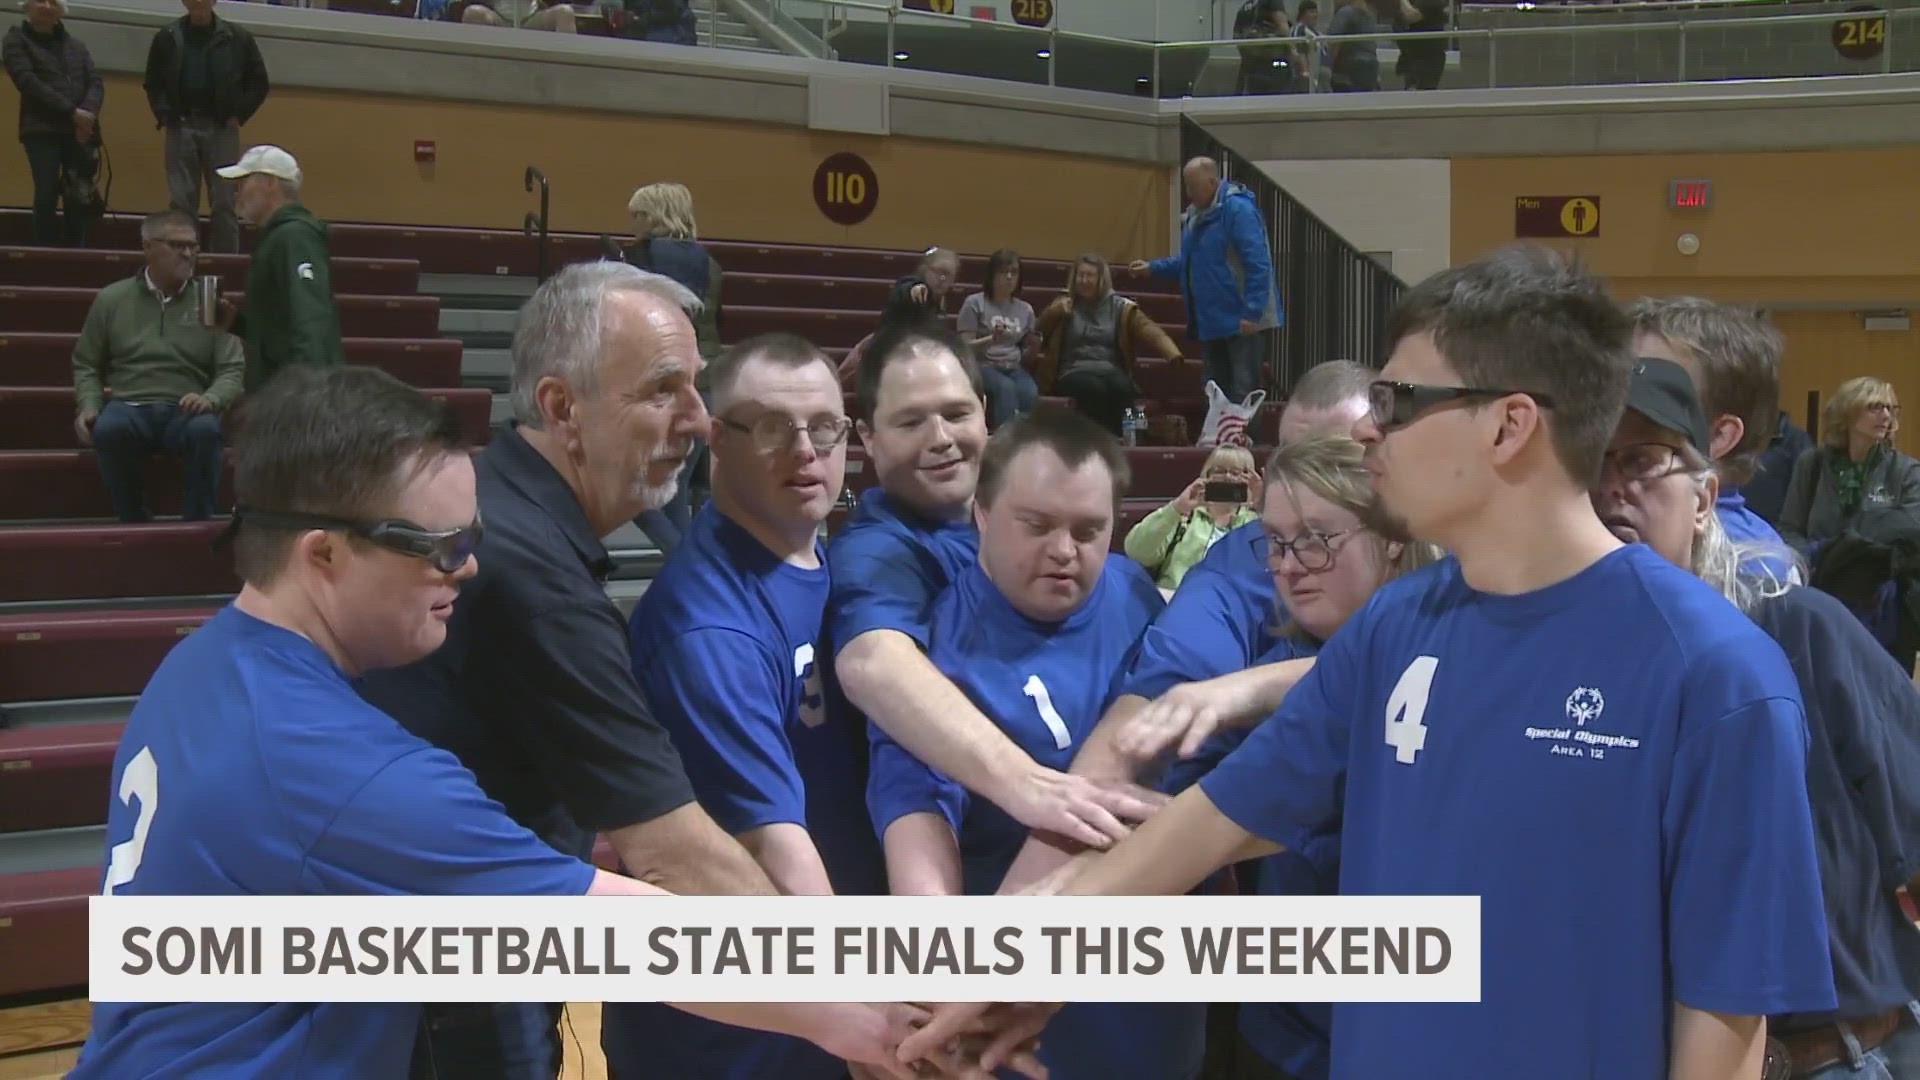 Special Olympics MI basketball state finals is this weekend